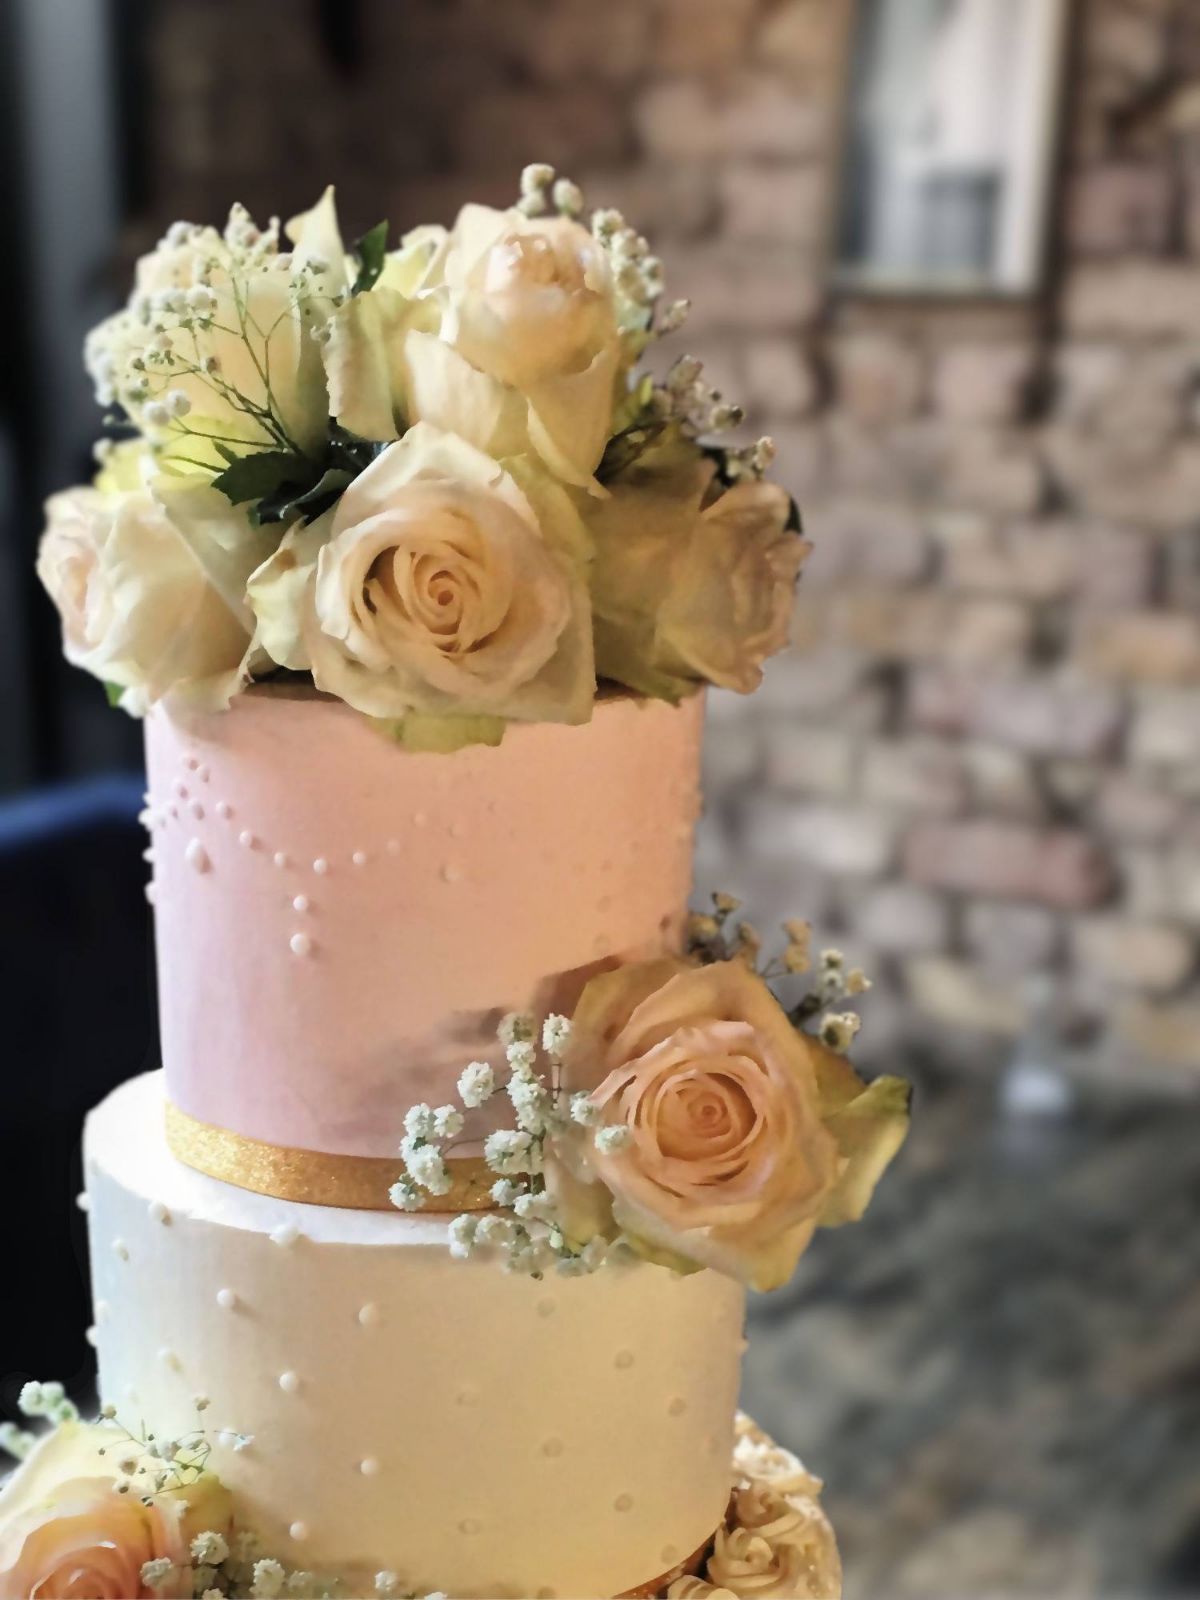 A 3 tier cake, covered with italian meringue buttercream, hand piped details and fresh roses.